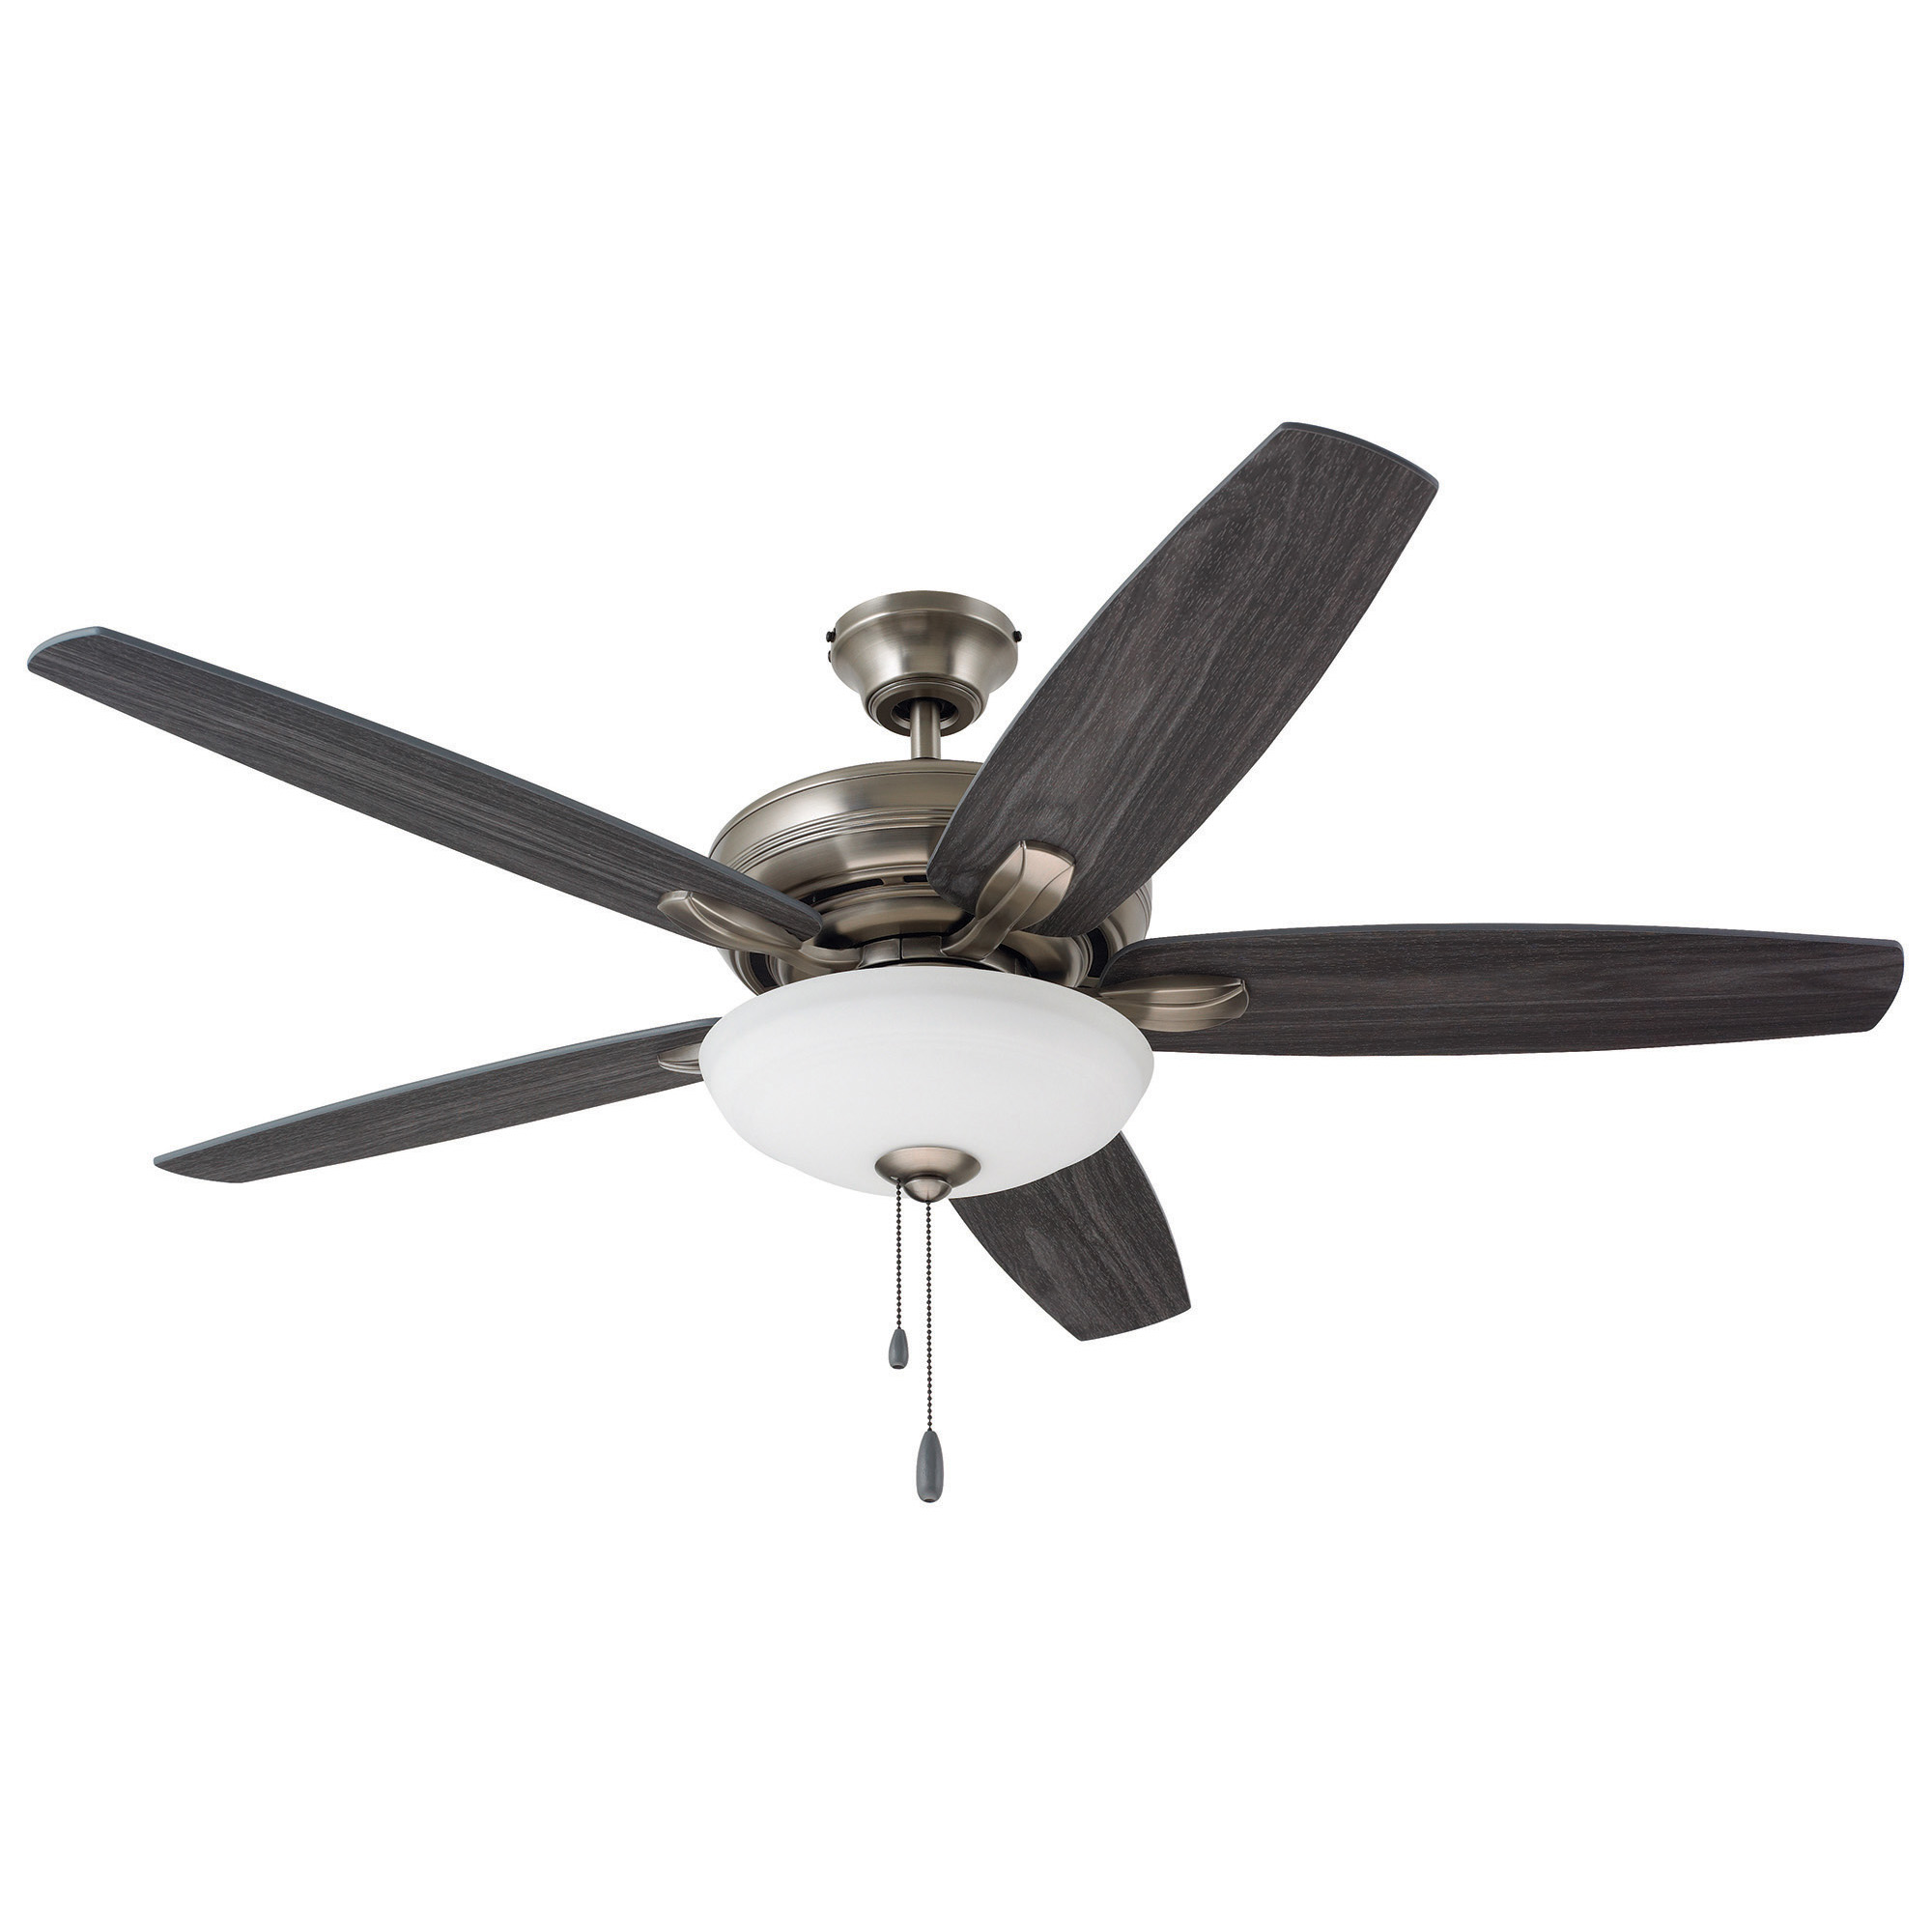 kathy ireland HOME by Luminance Brands 52 inch Ashland Low Profile Hugger Ceiling Fan with LED Light Kit in Antique Pewter with